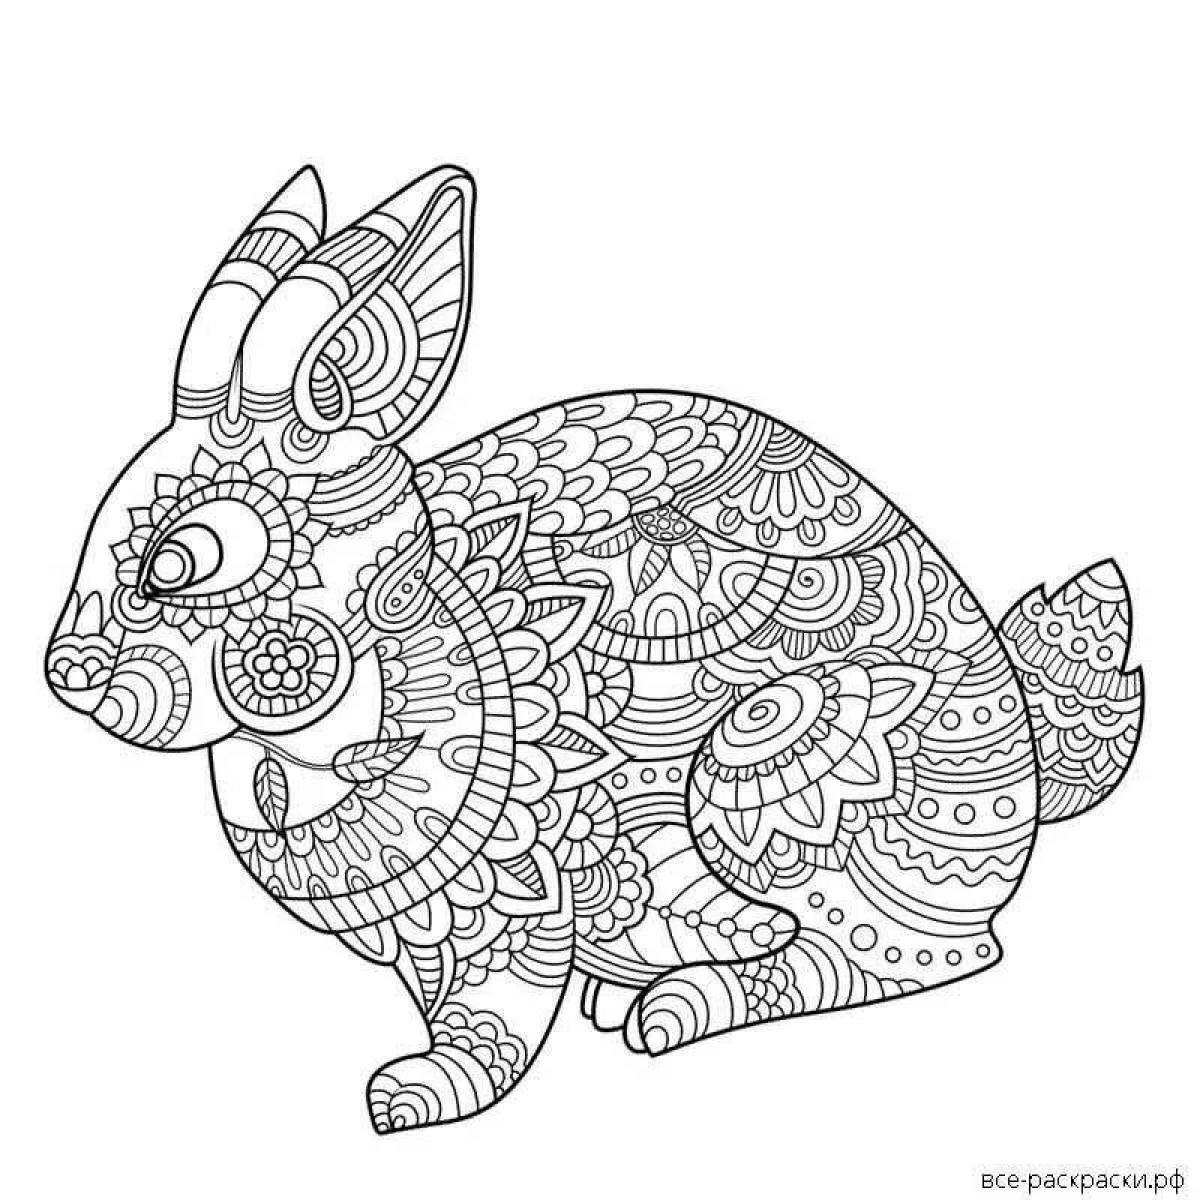 Fascinating anti-stress coloring hare